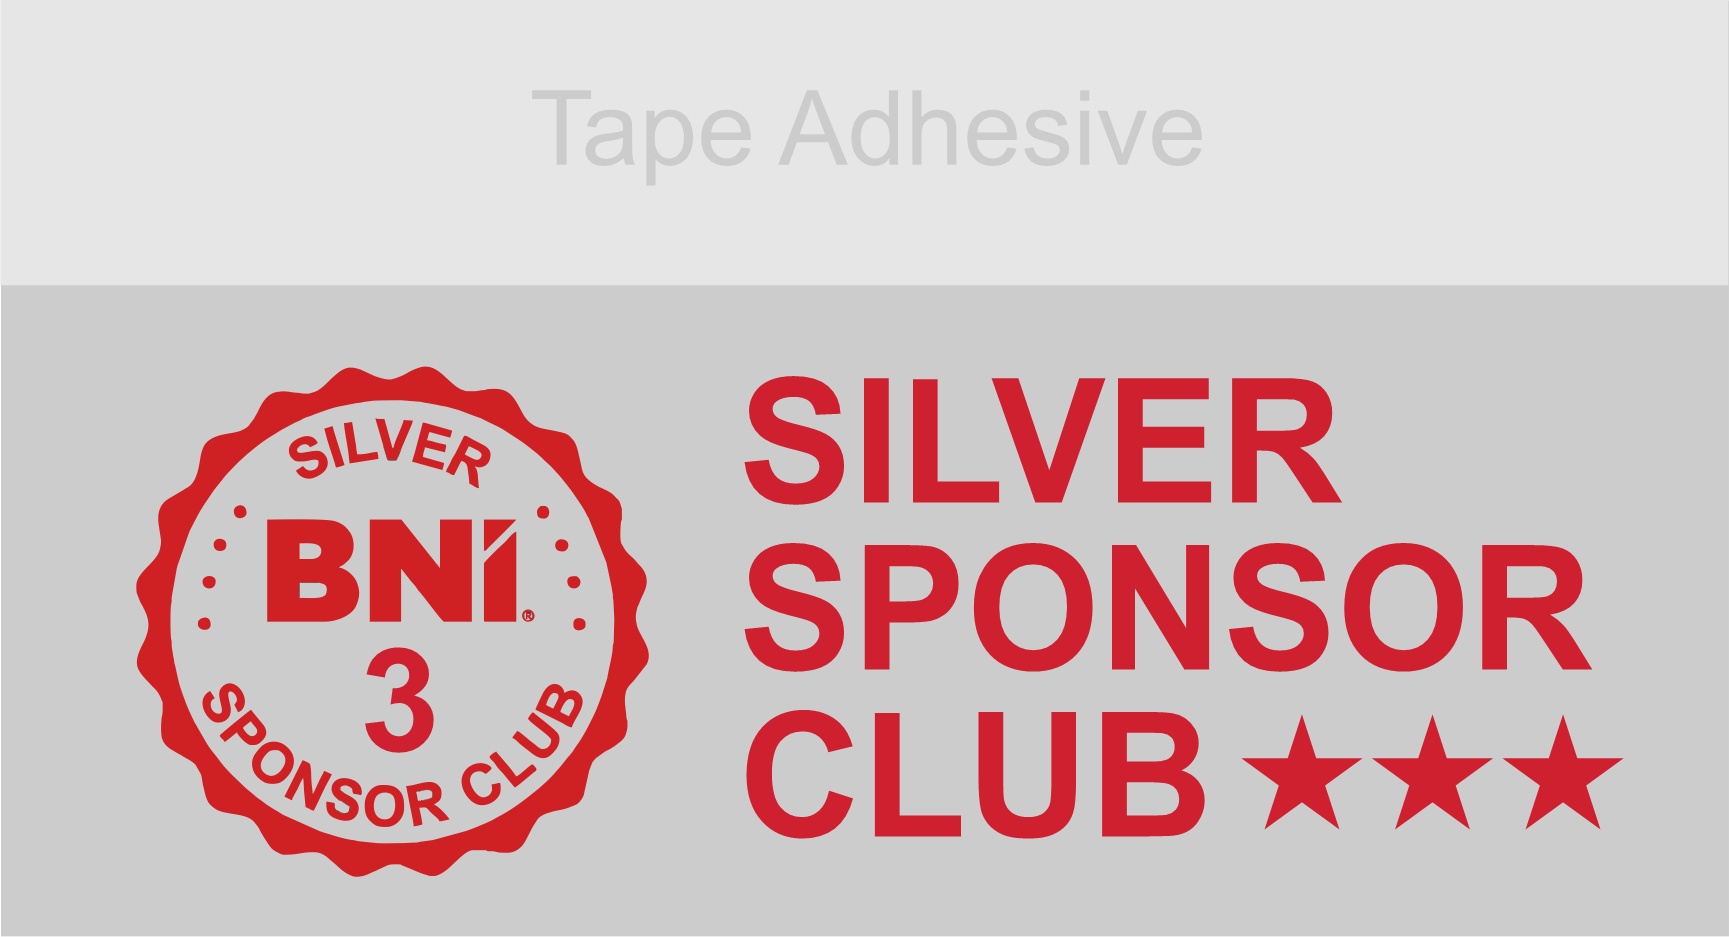 Silver and Red Sponor Ribbon Club 3 Sponsor